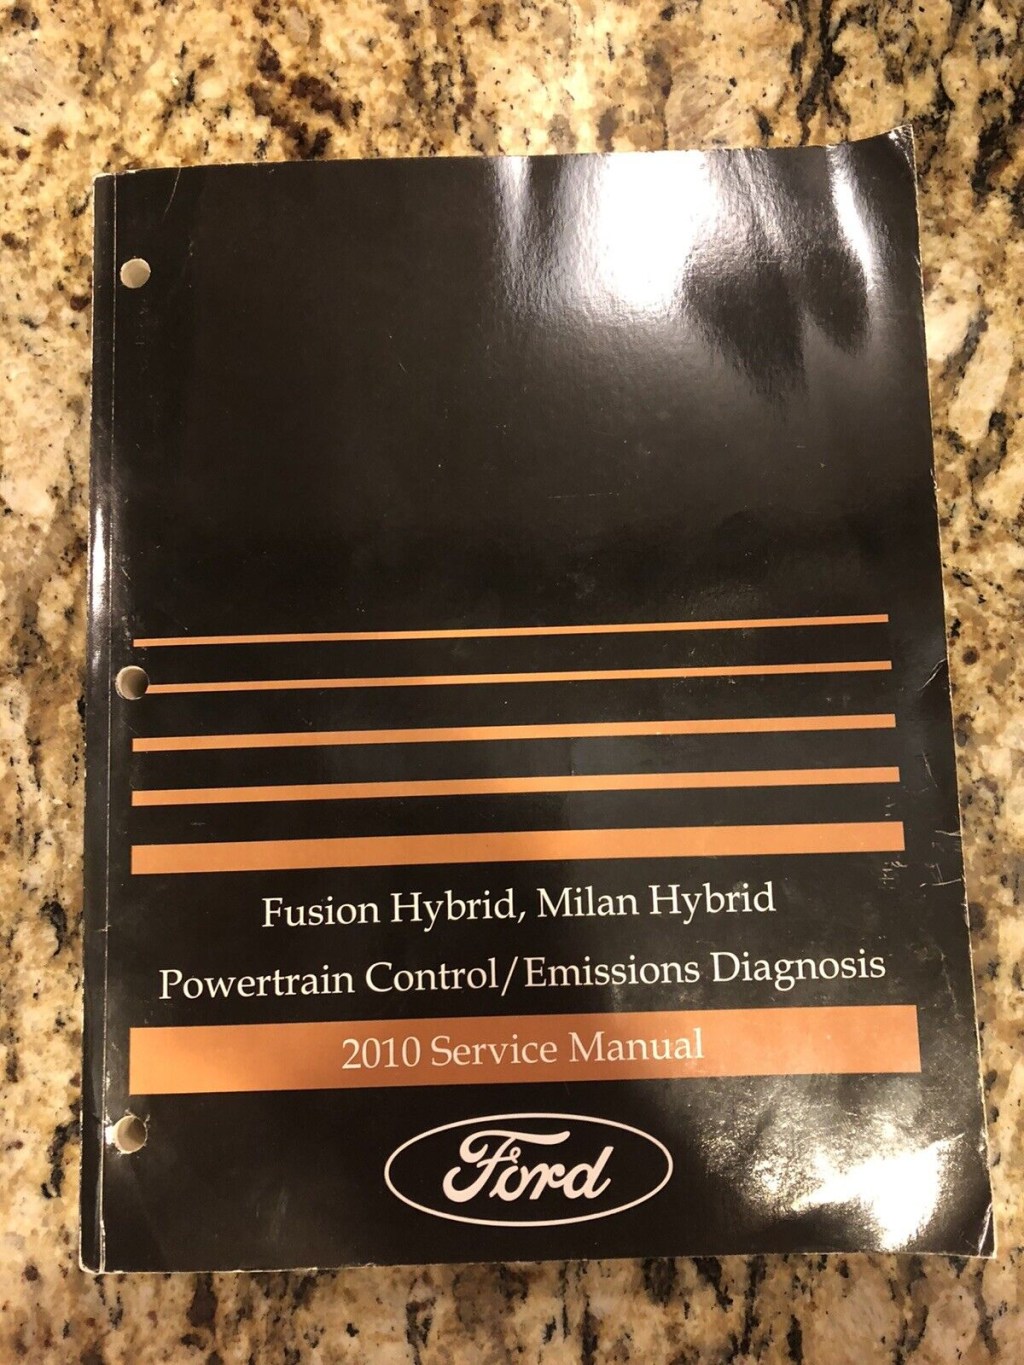 Picture of: FORD FUSION MILAN HYBRID CAR POWERTRAIN EMISSIONS DIAGNOSIS SERVICE MANUAL  BOOK